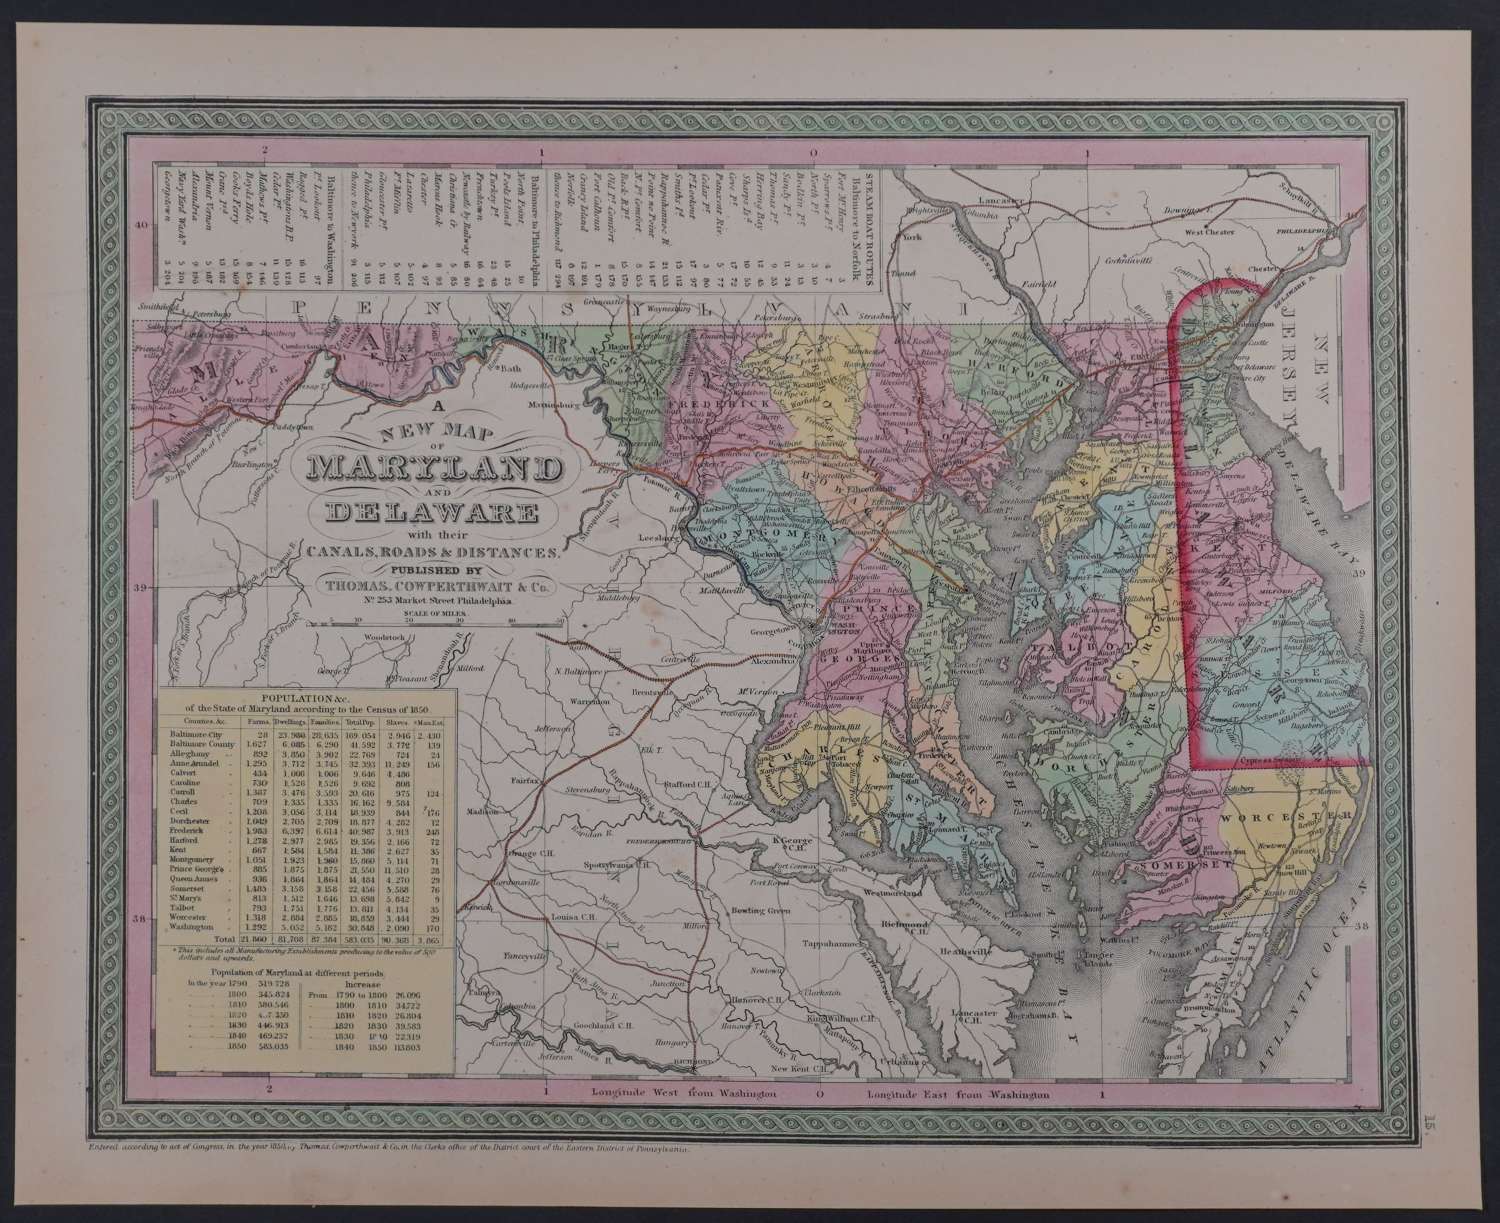 A New Map of Maryland by Thomas Cowerthwait & Co